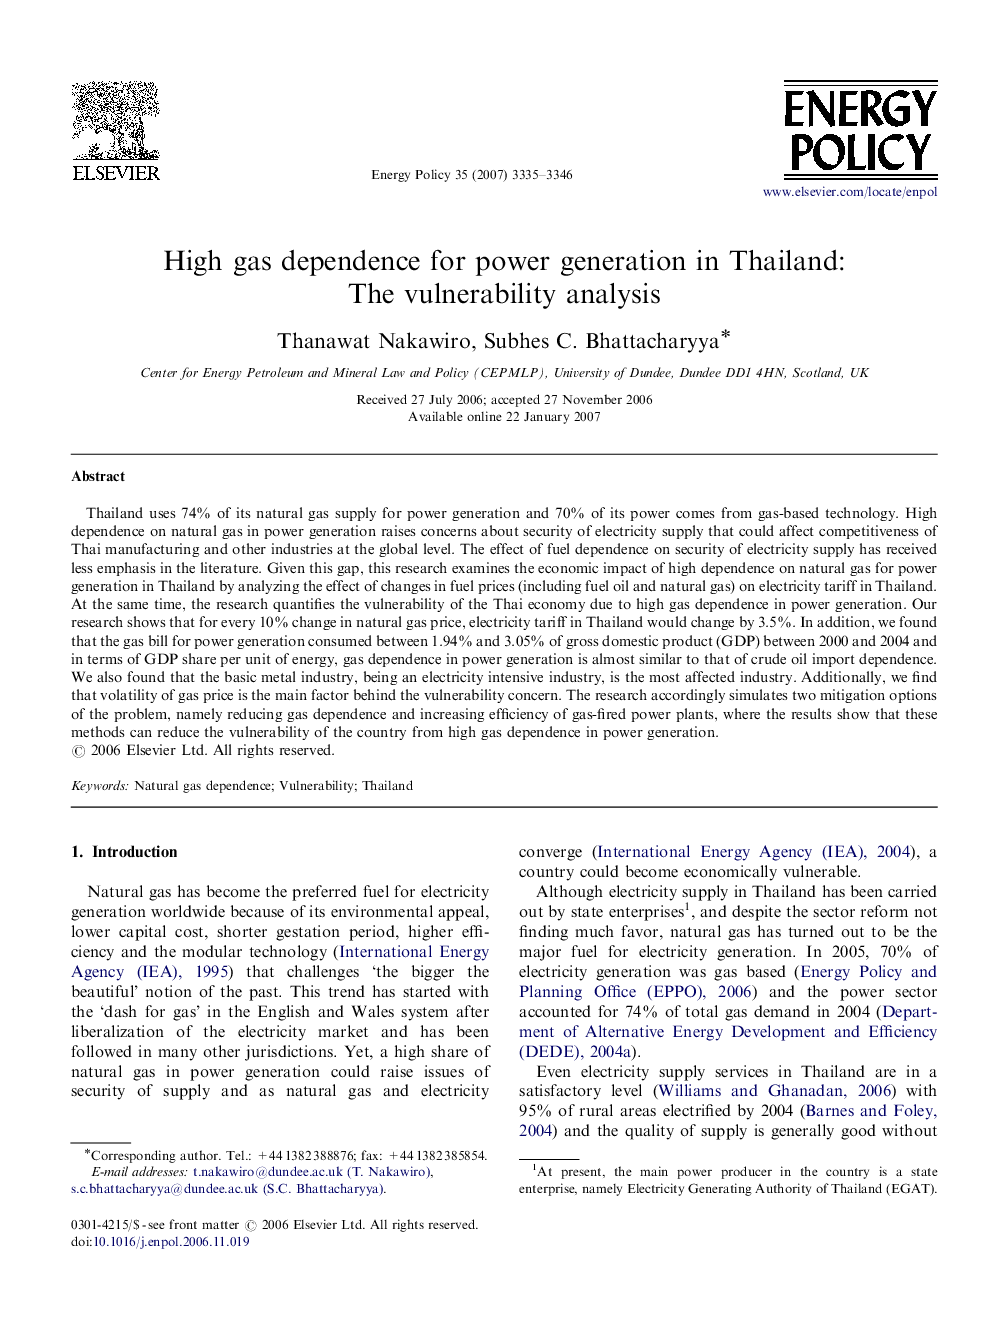 High gas dependence for power generation in Thailand: The vulnerability analysis